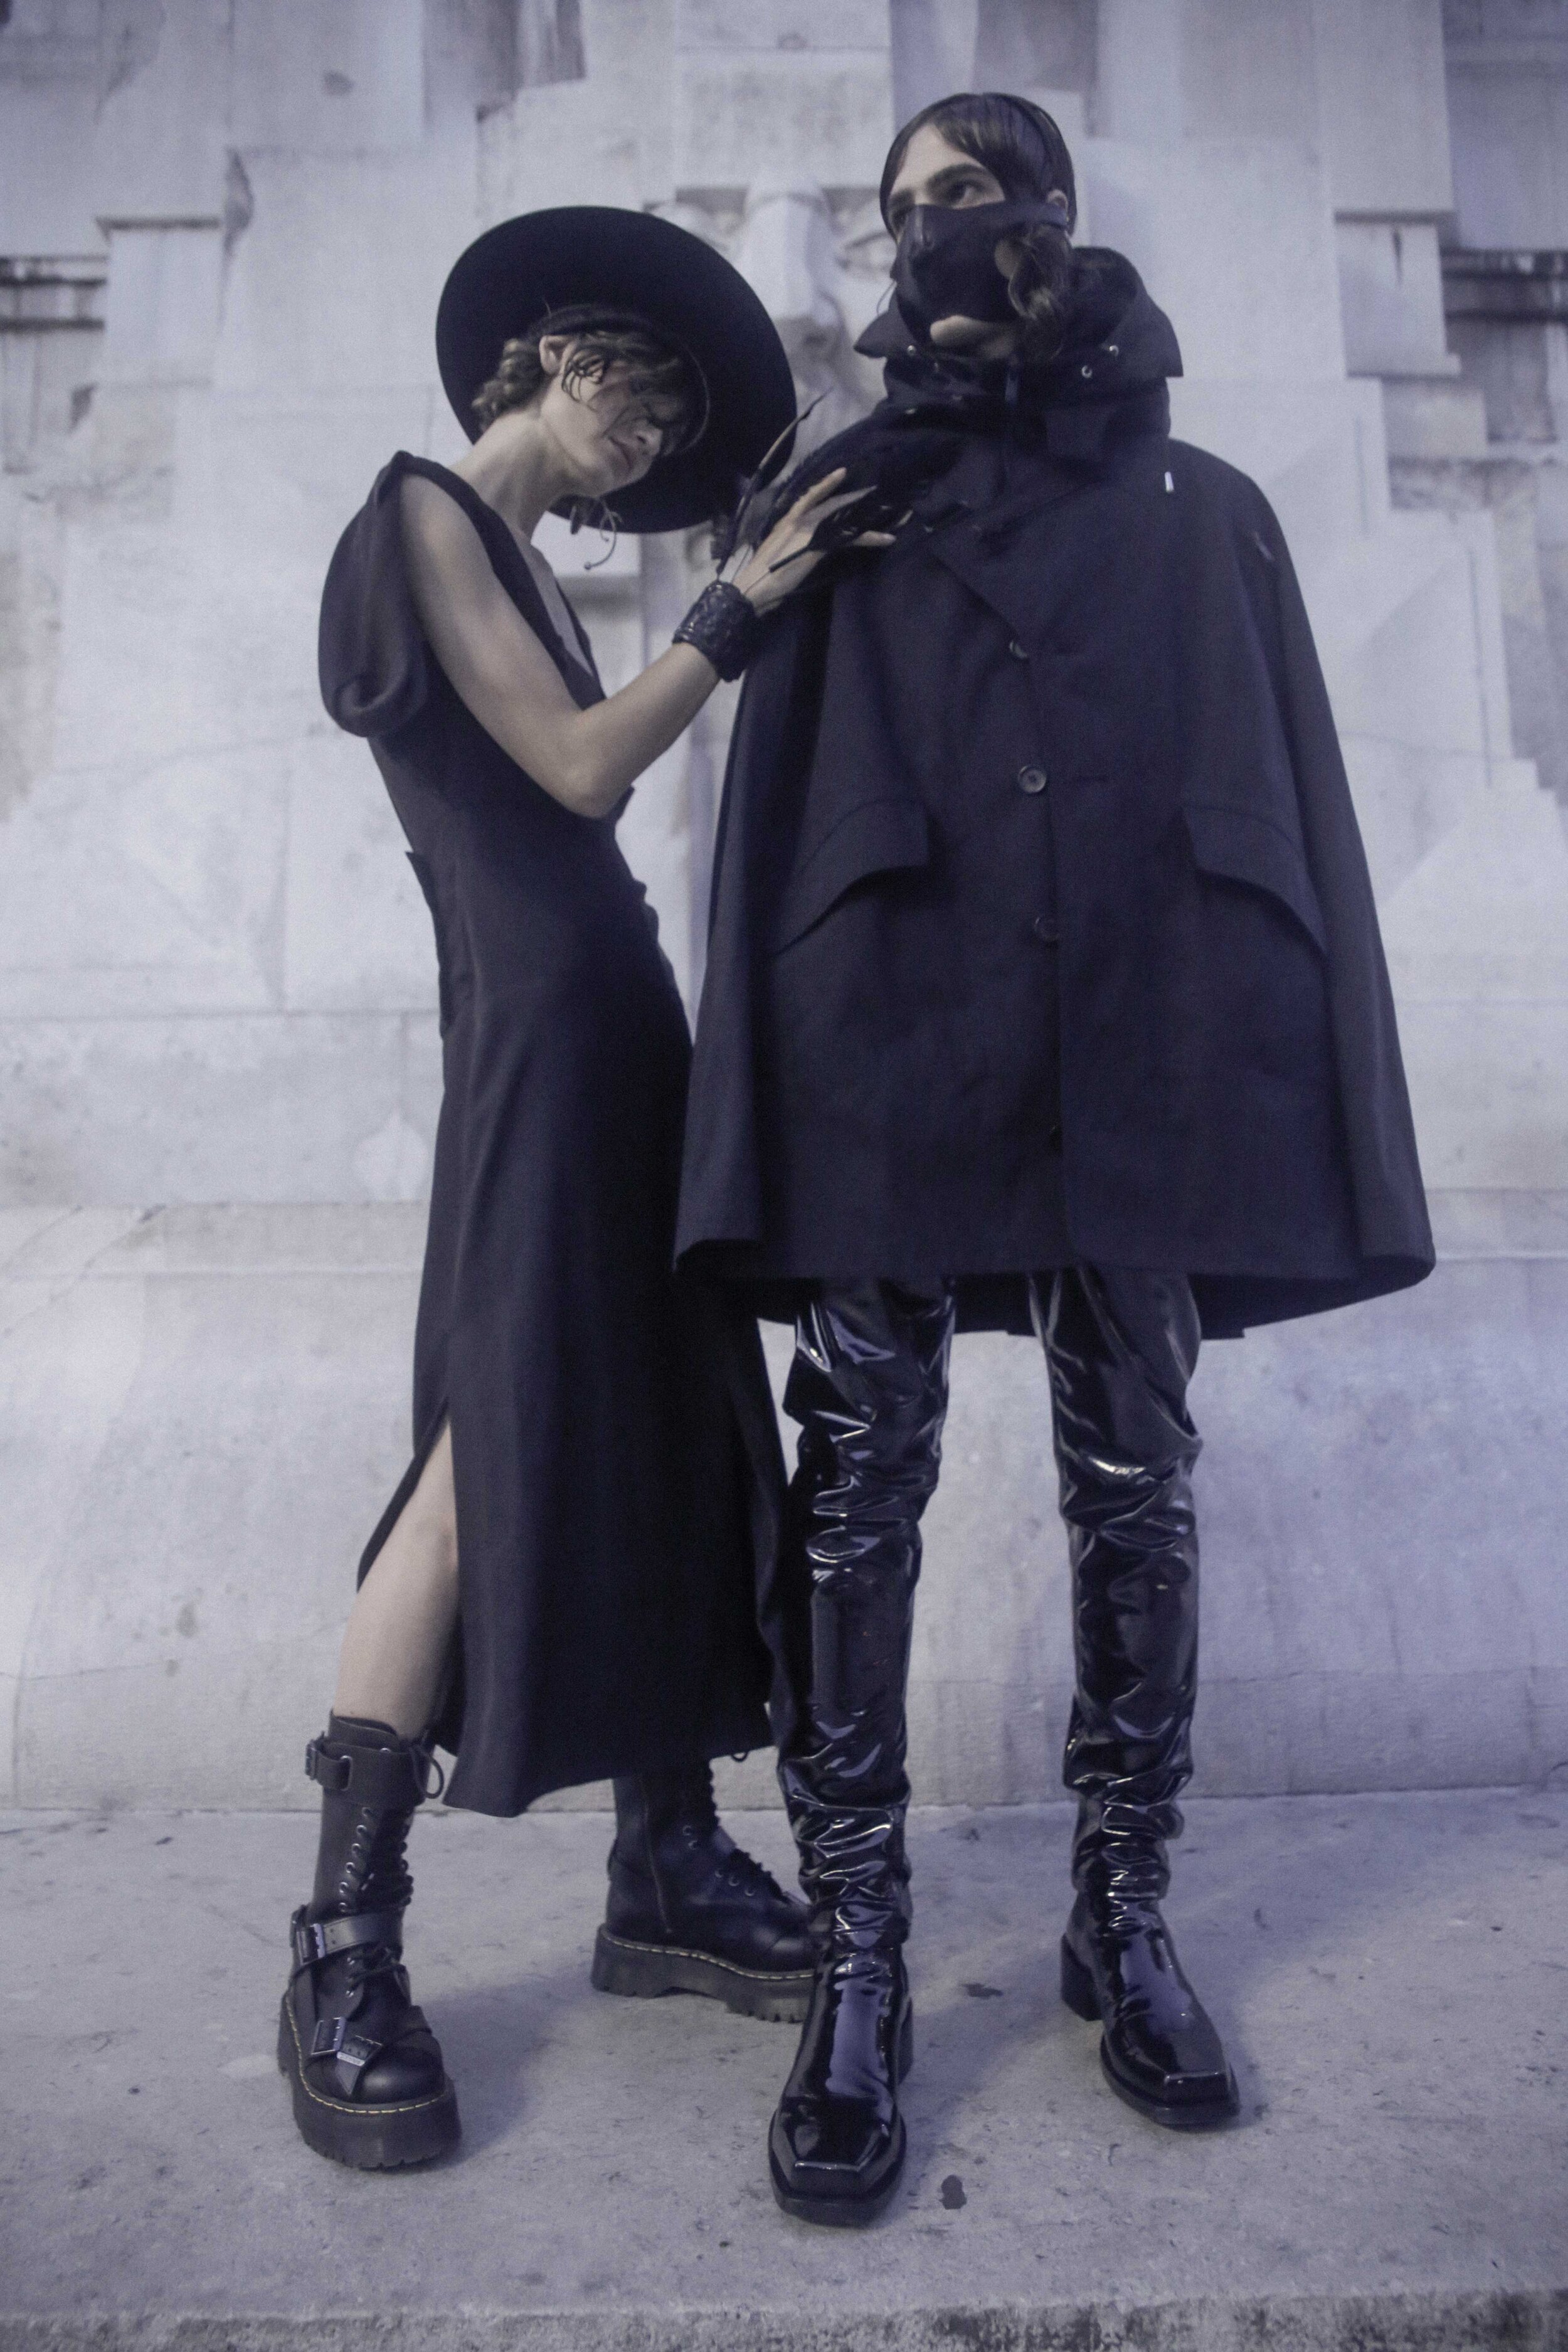 Left to right: BOTTEGA VENETA dress, GIVENCHY hat, FLAVIA CAVALCANTI feather piece, and DR. MARTENS shoes. LES HOMMES cape and coat, TOM REBEL pants and mask, and GIVENCHY boots.